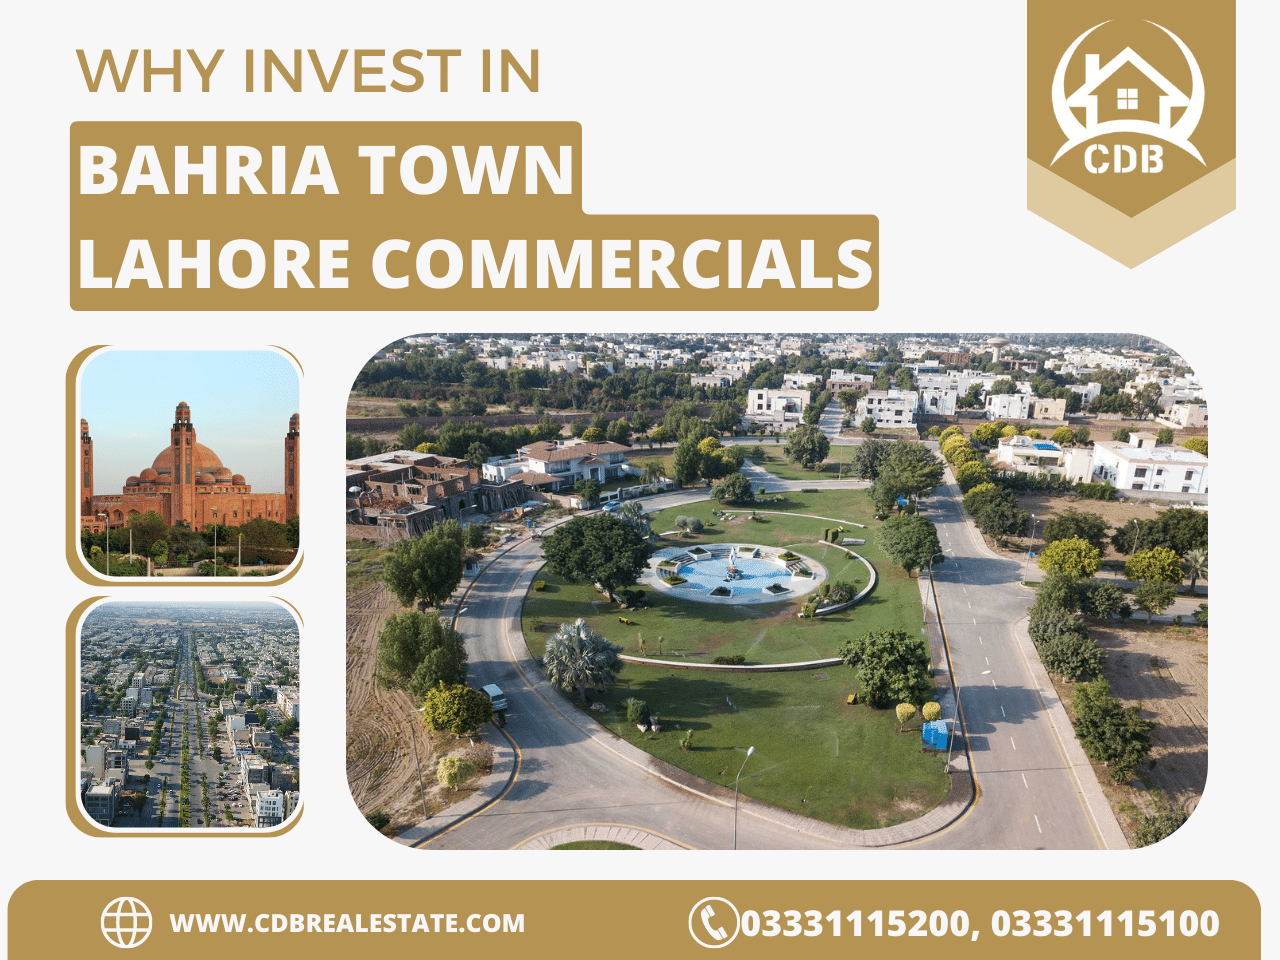 Why Invest In Bahria Town Lahore Commercials